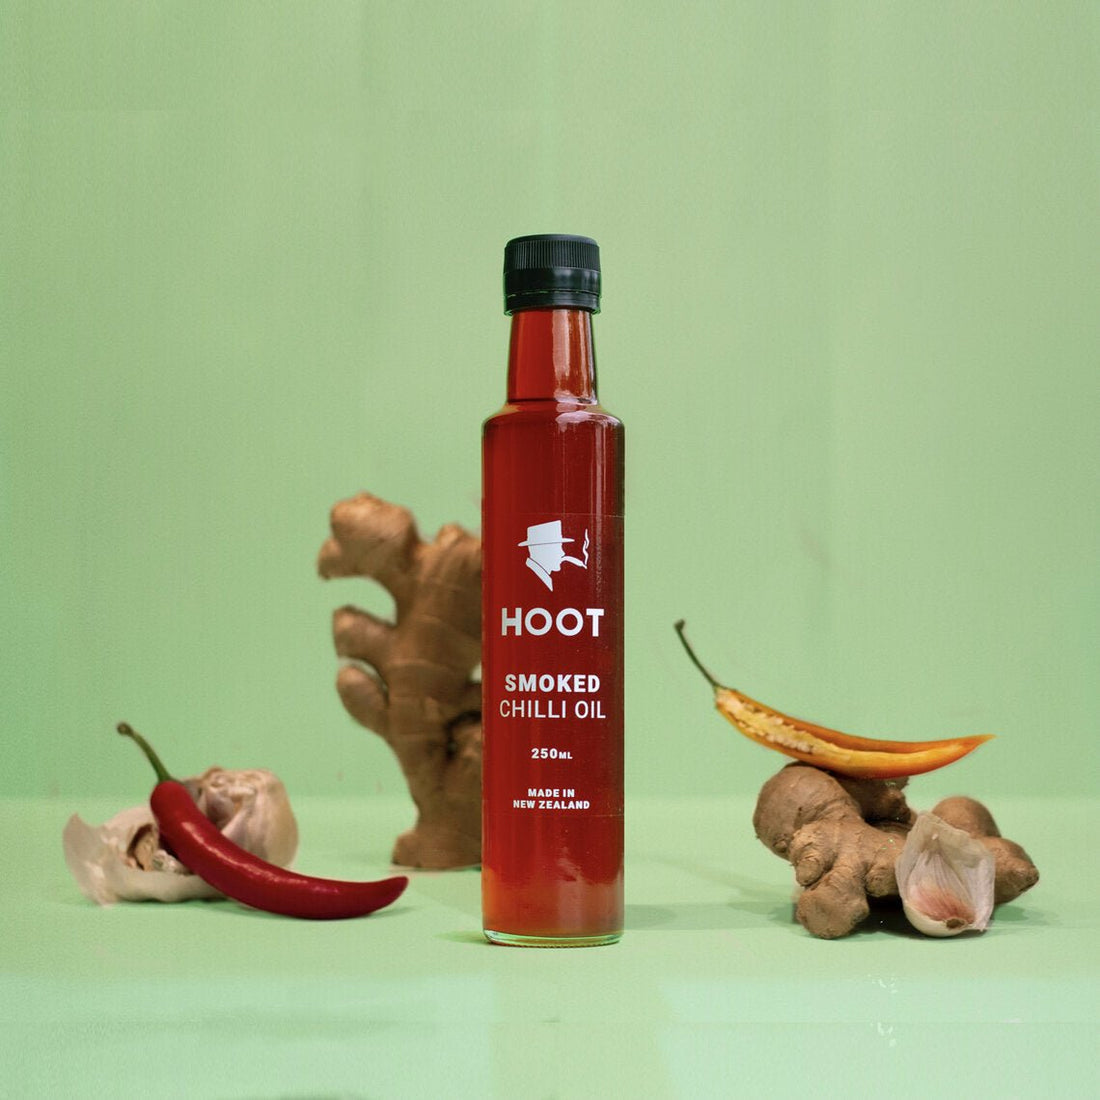 Hoot - Smoked Chilli Oil - The Flower Crate